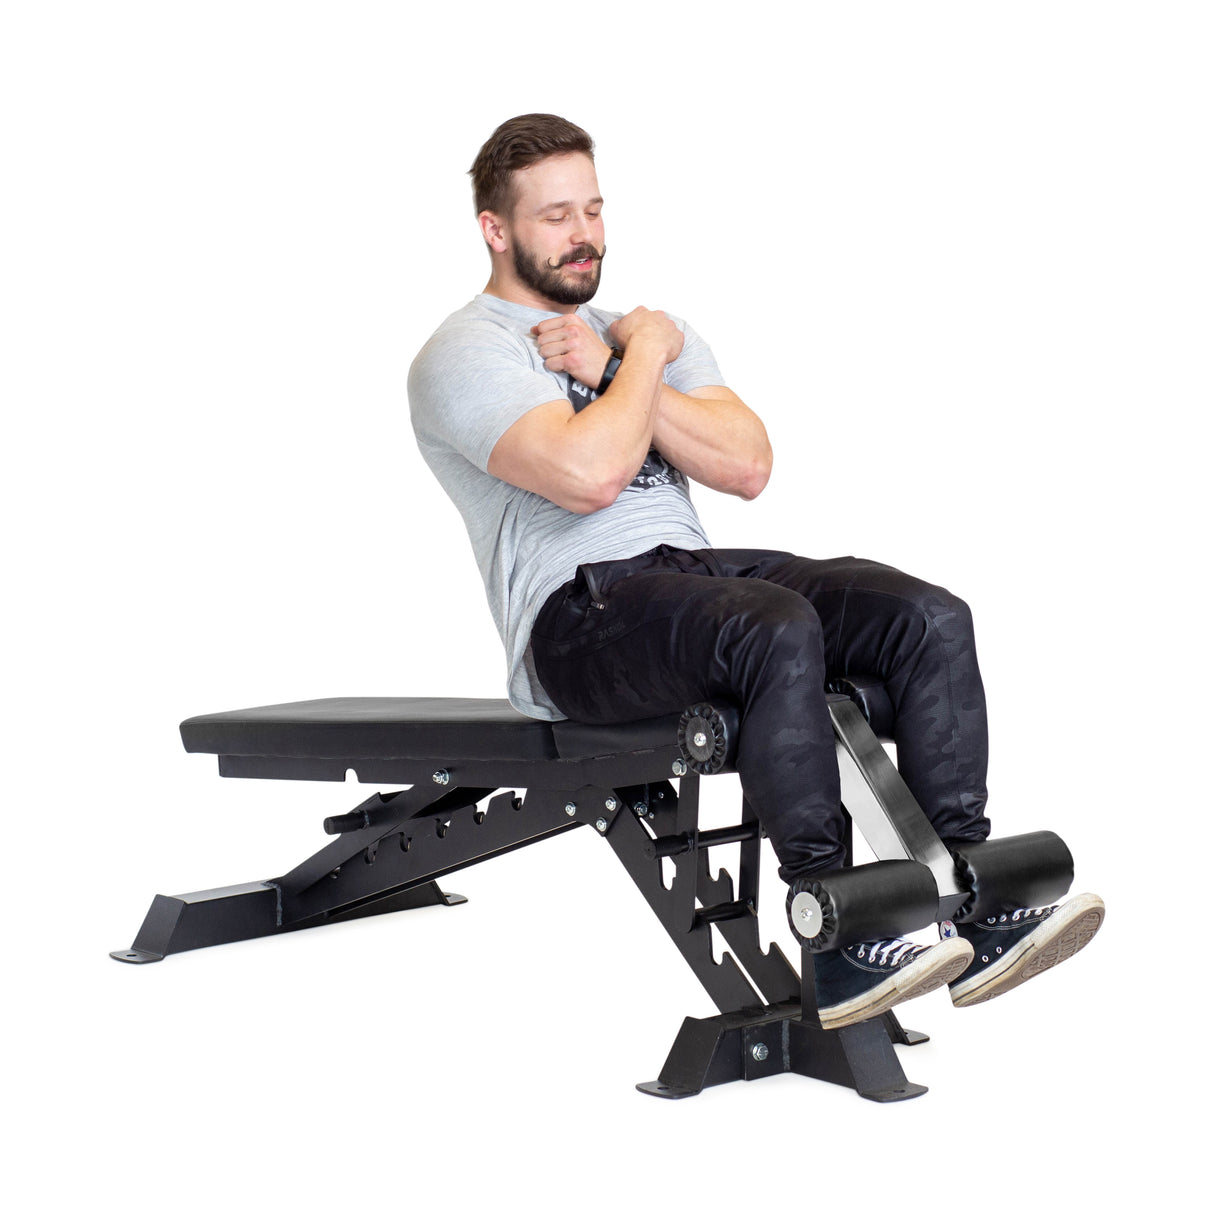 Male athlete doing ab bench workout using Leg Roller Bench Attachment